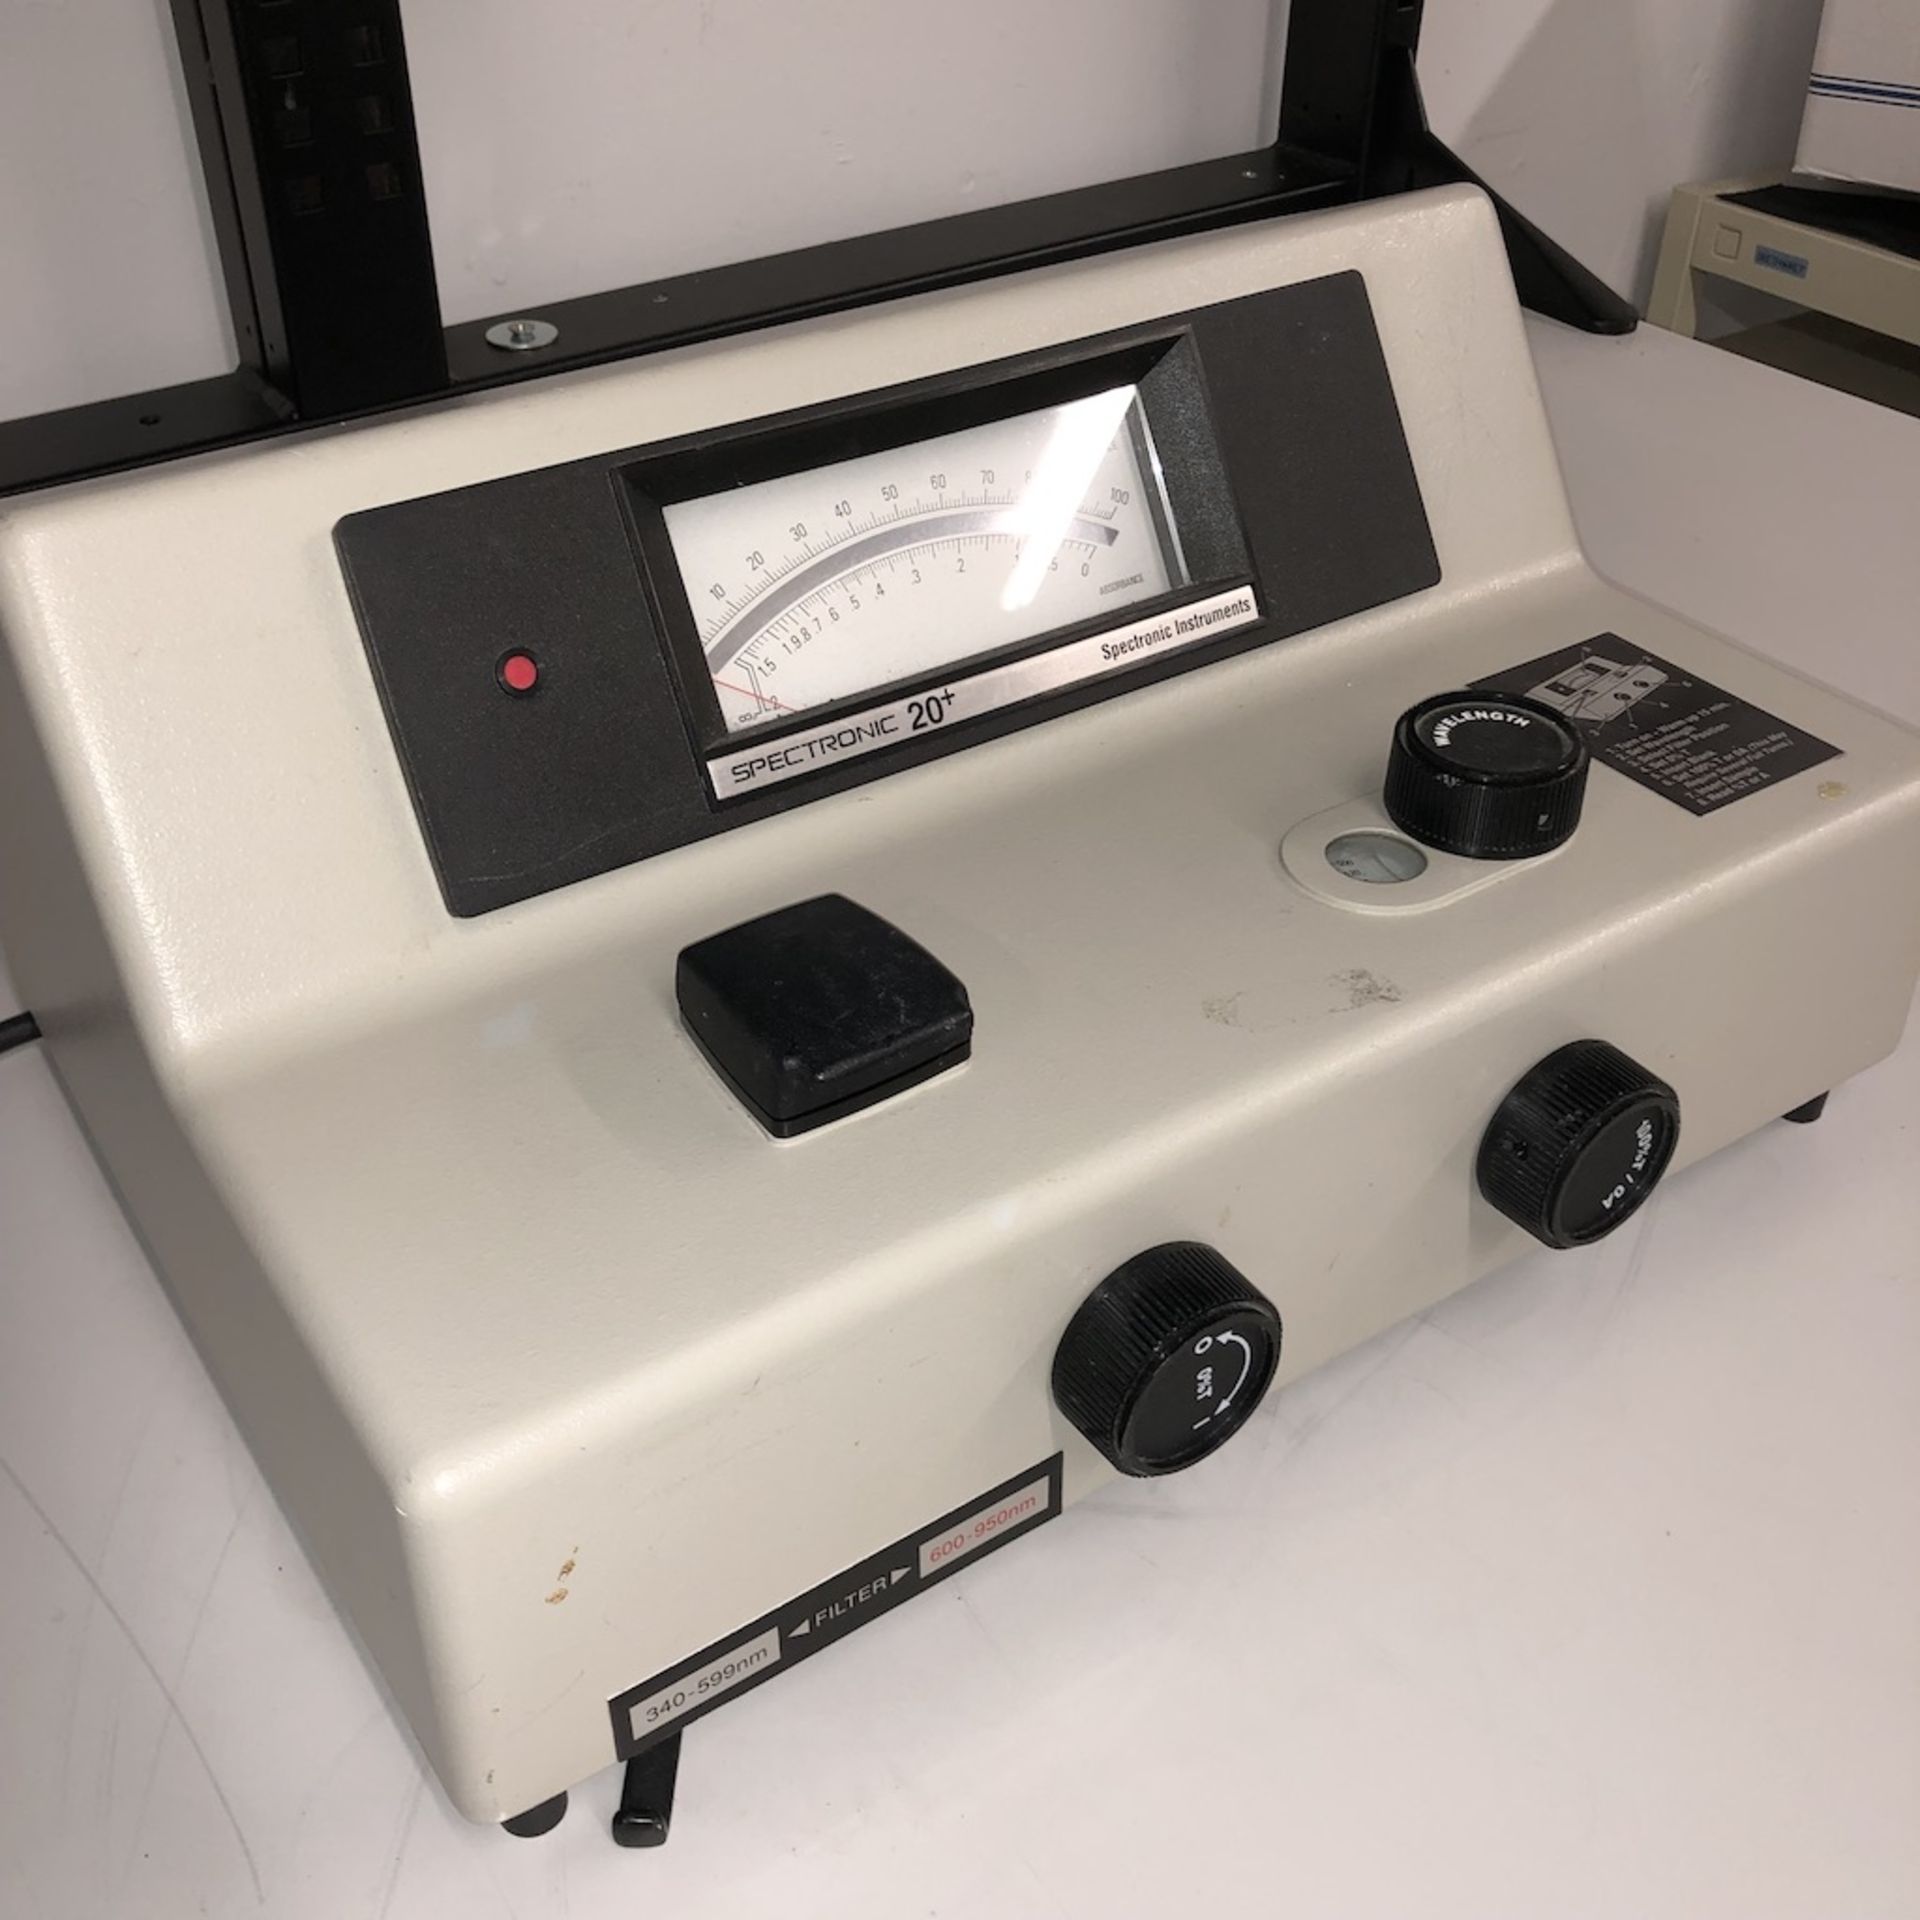 SPECTRONIC INSTRUMENTS 333182 SPECTRONIC 20+ SPECTROMETER - Image 4 of 7